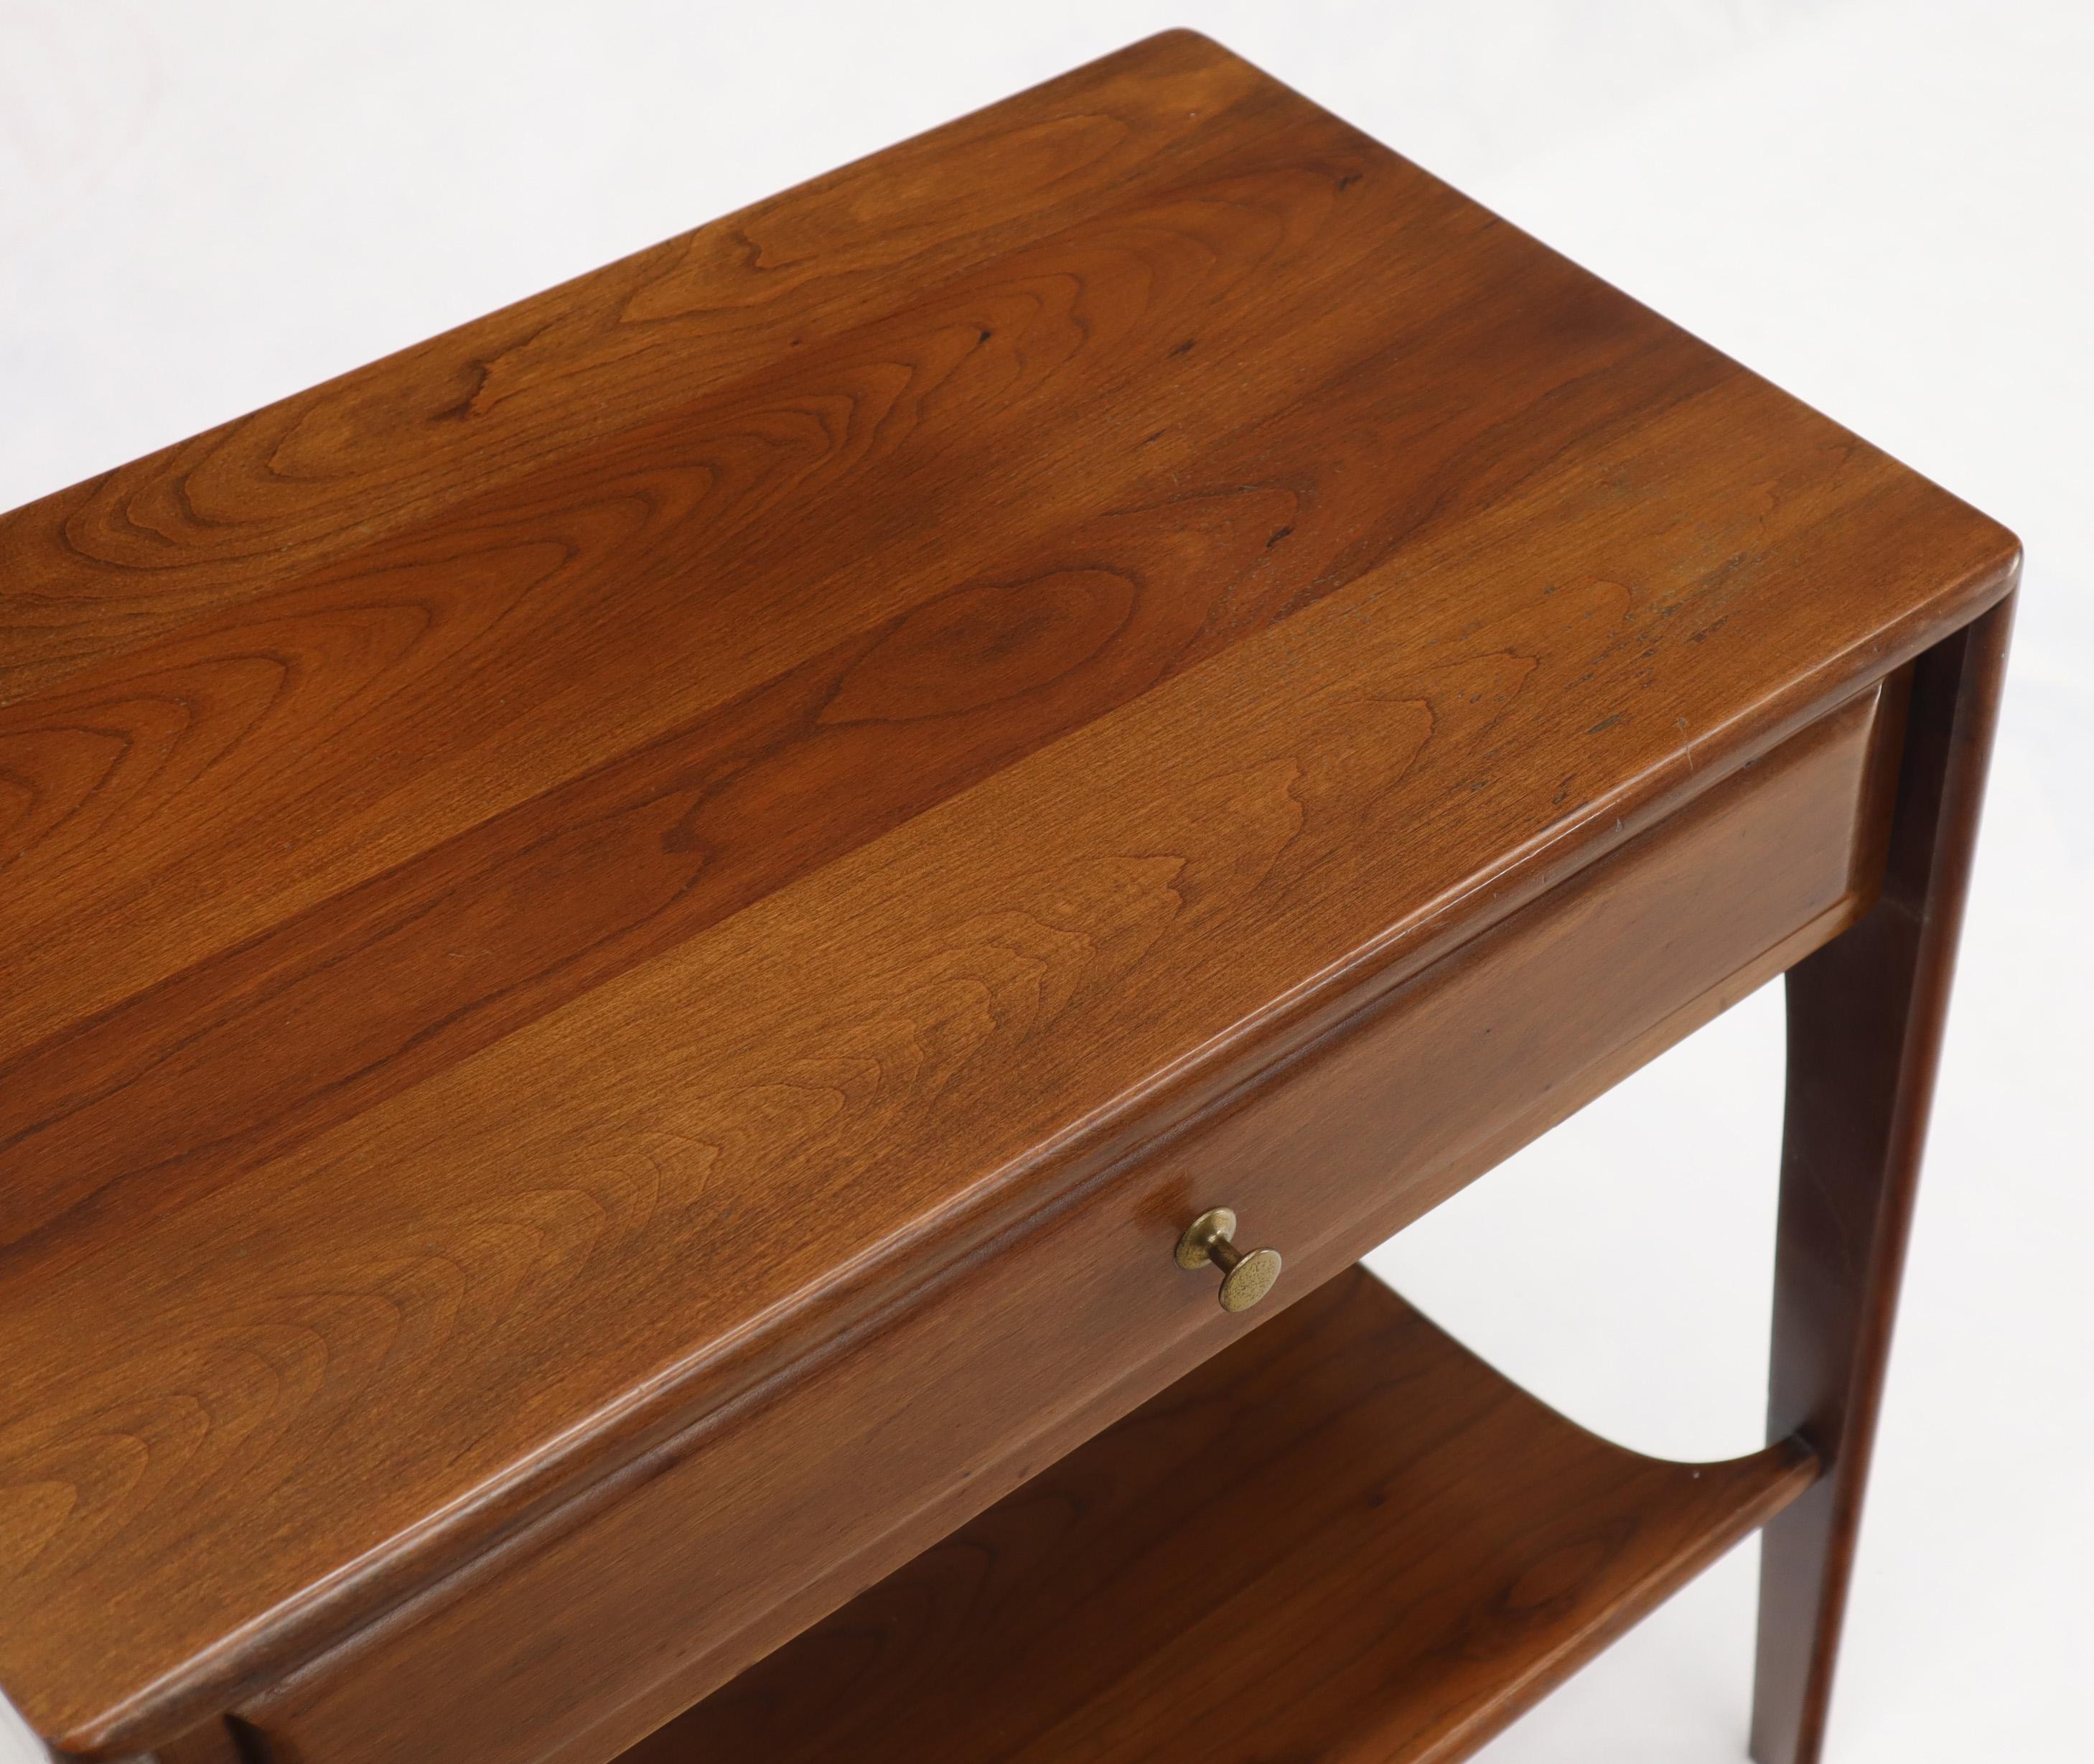 20th Century Solid Cherry One Drawer End Table Nightstand Mid-Century Modern